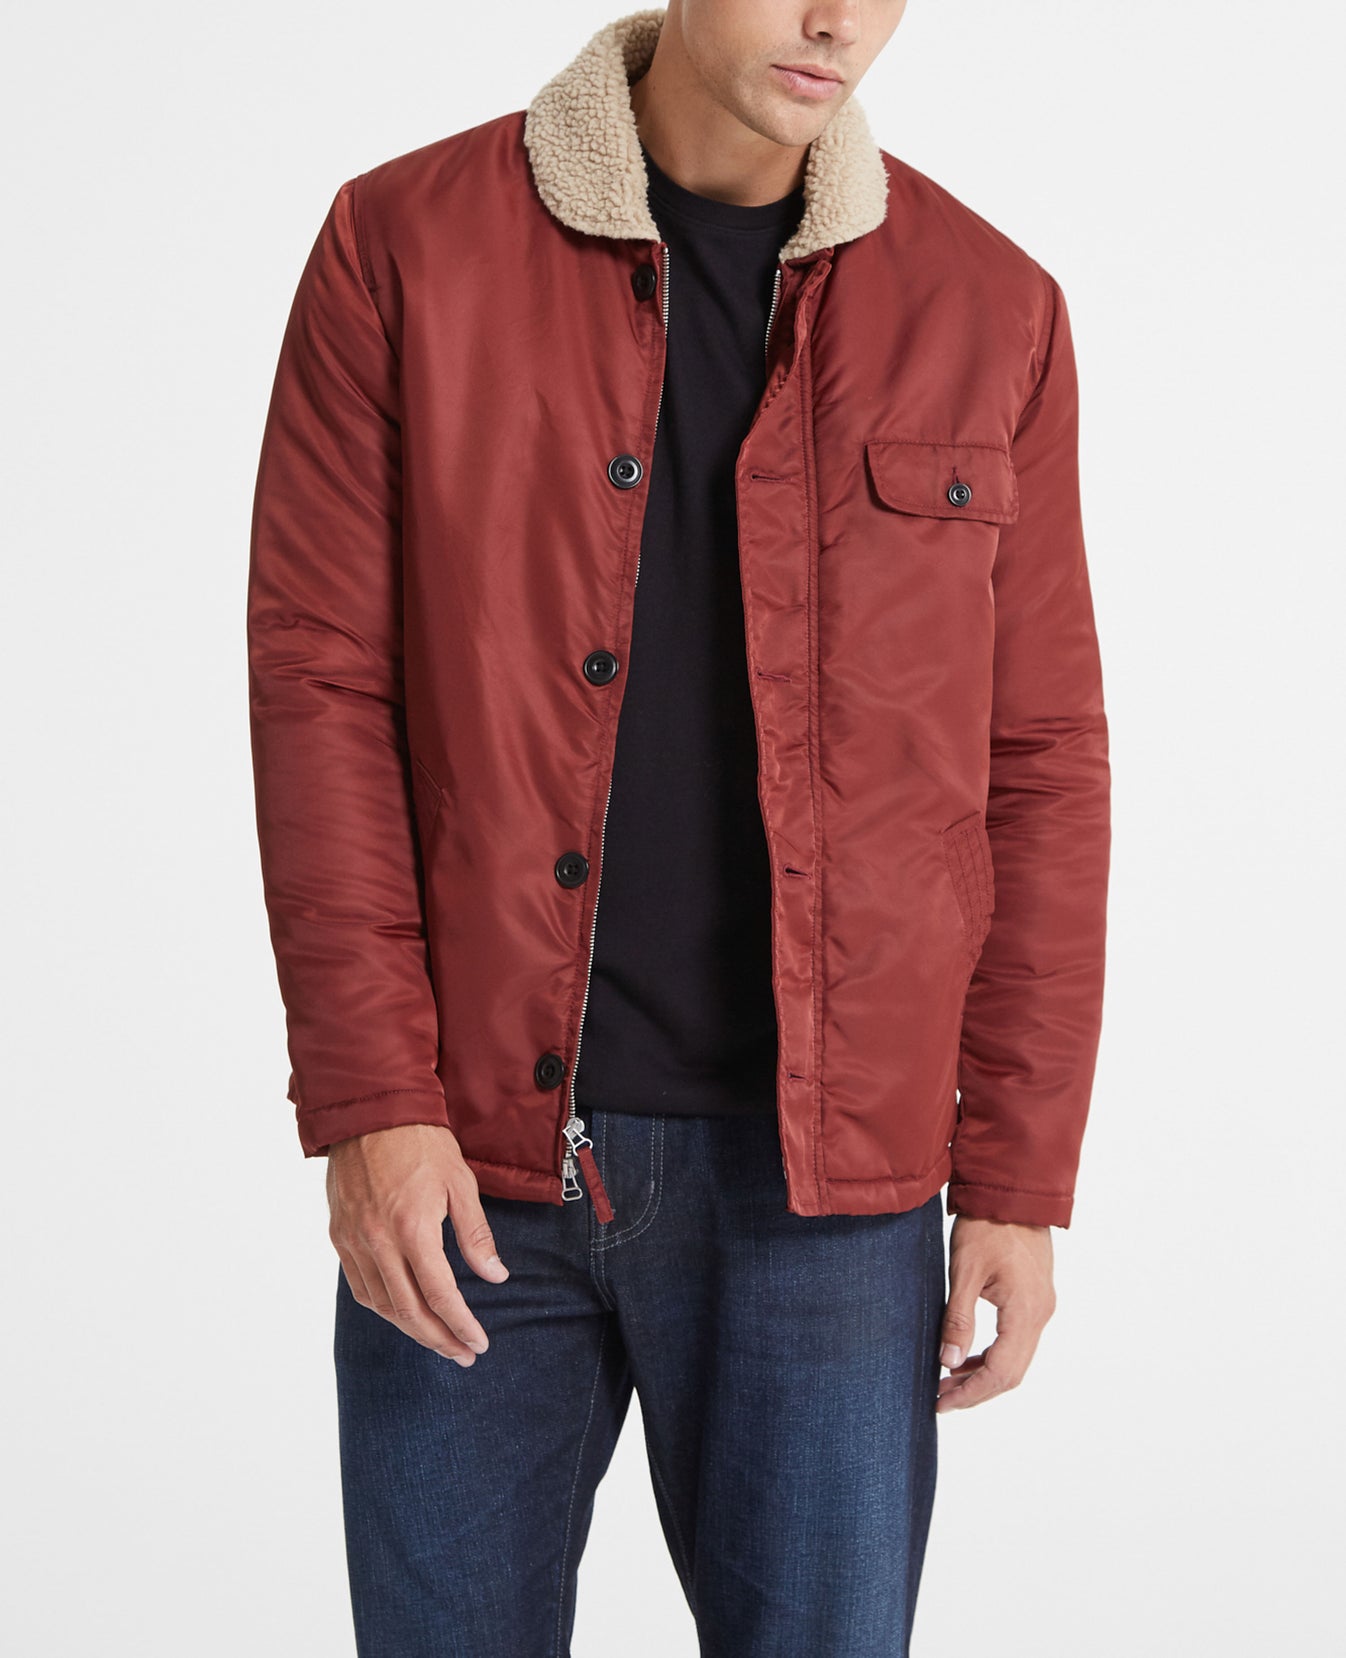 Holt Shearling Lined Jacket Tannic Red Shearling Jacket Men Tops Photo 1